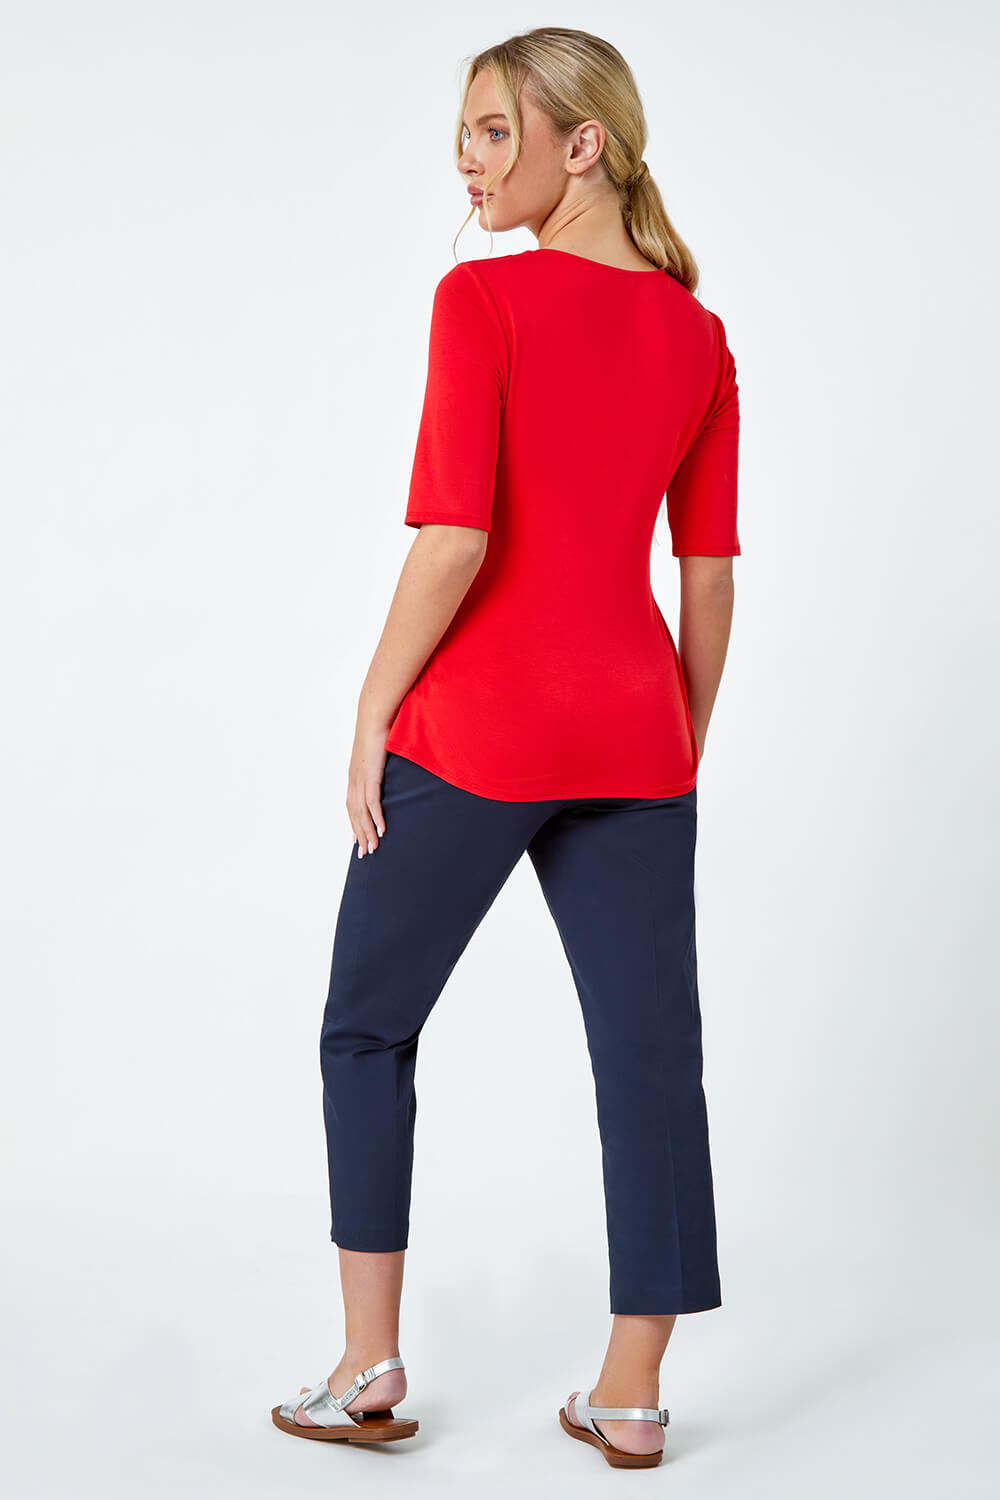 Red Petite Ruched Ribbed Stretch Top, Image 3 of 6